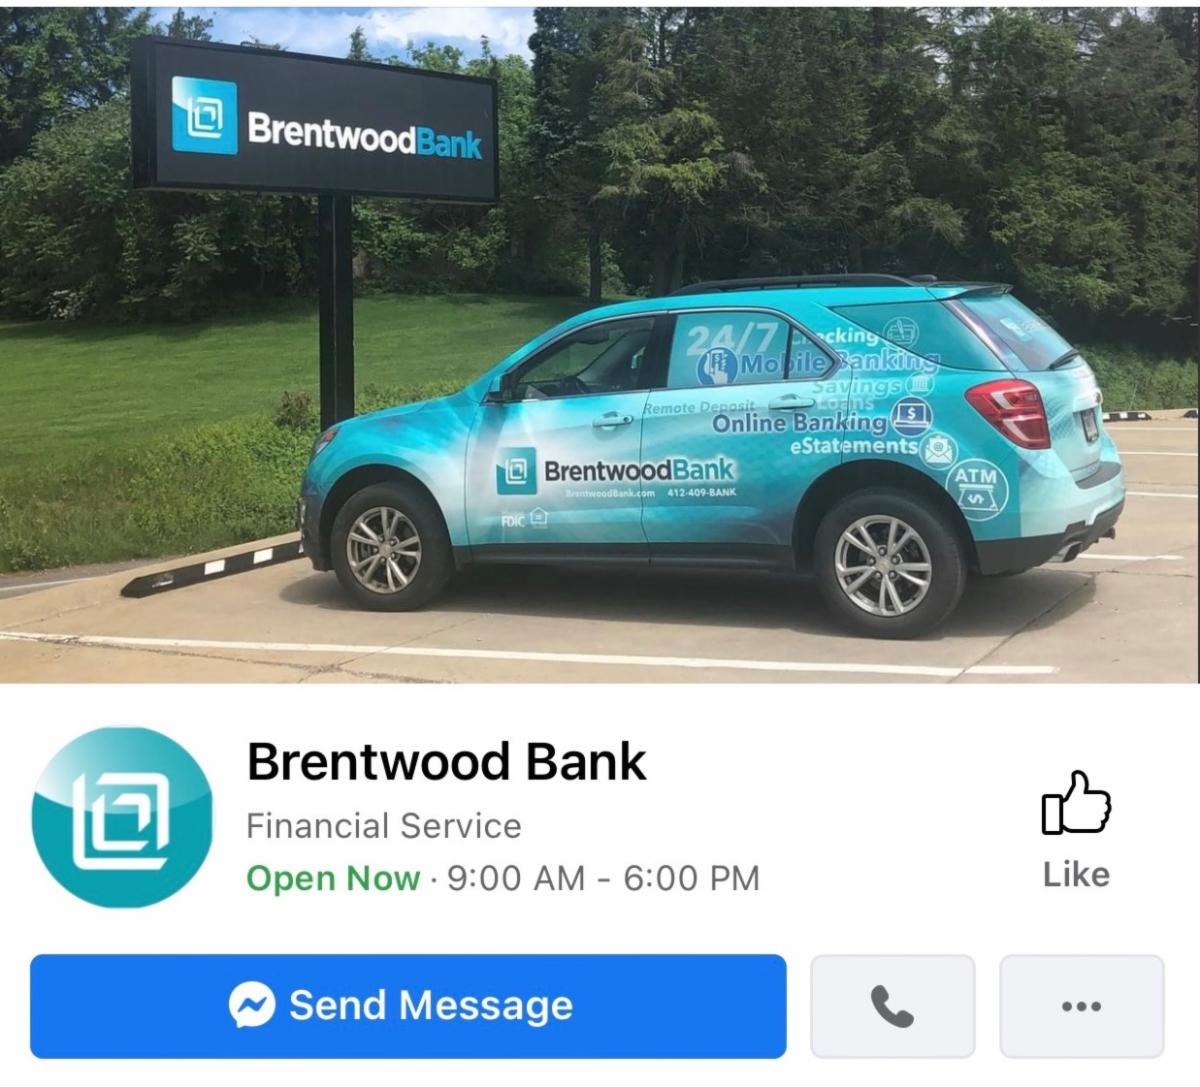 Facebook post with picture of the Brentwood Bank car.